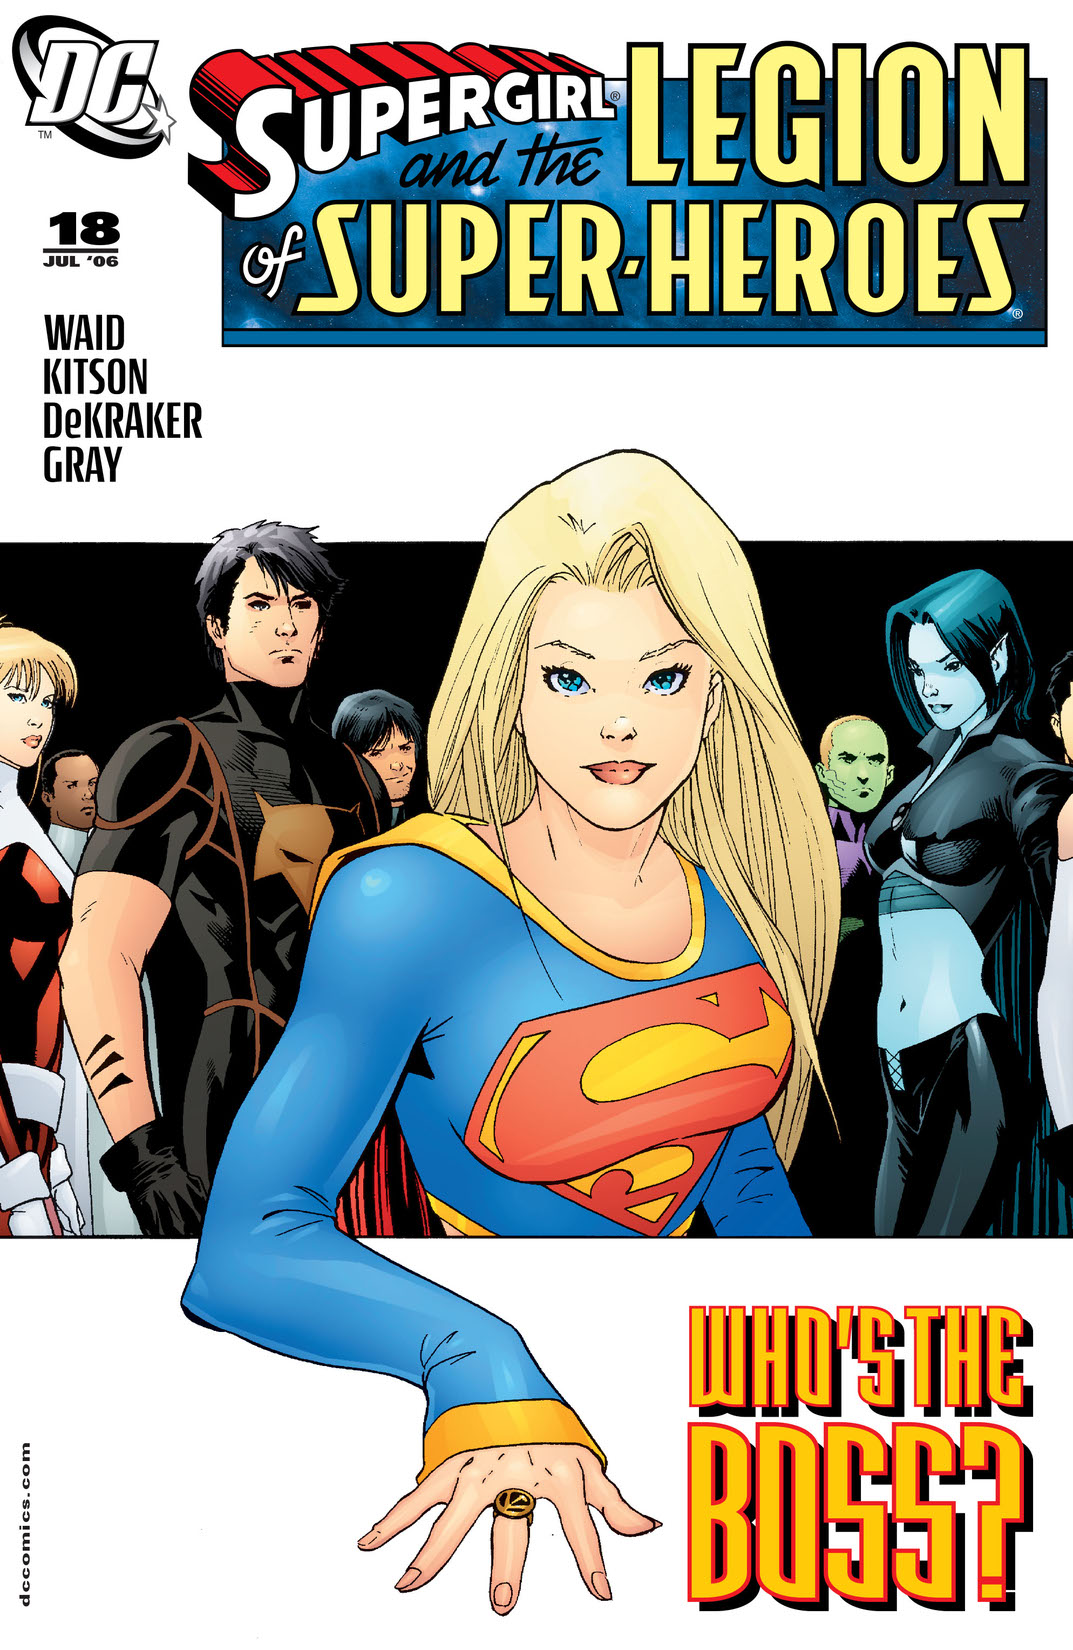 Supergirl and The Legion of Super-Heroes (2006-) #18 preview images